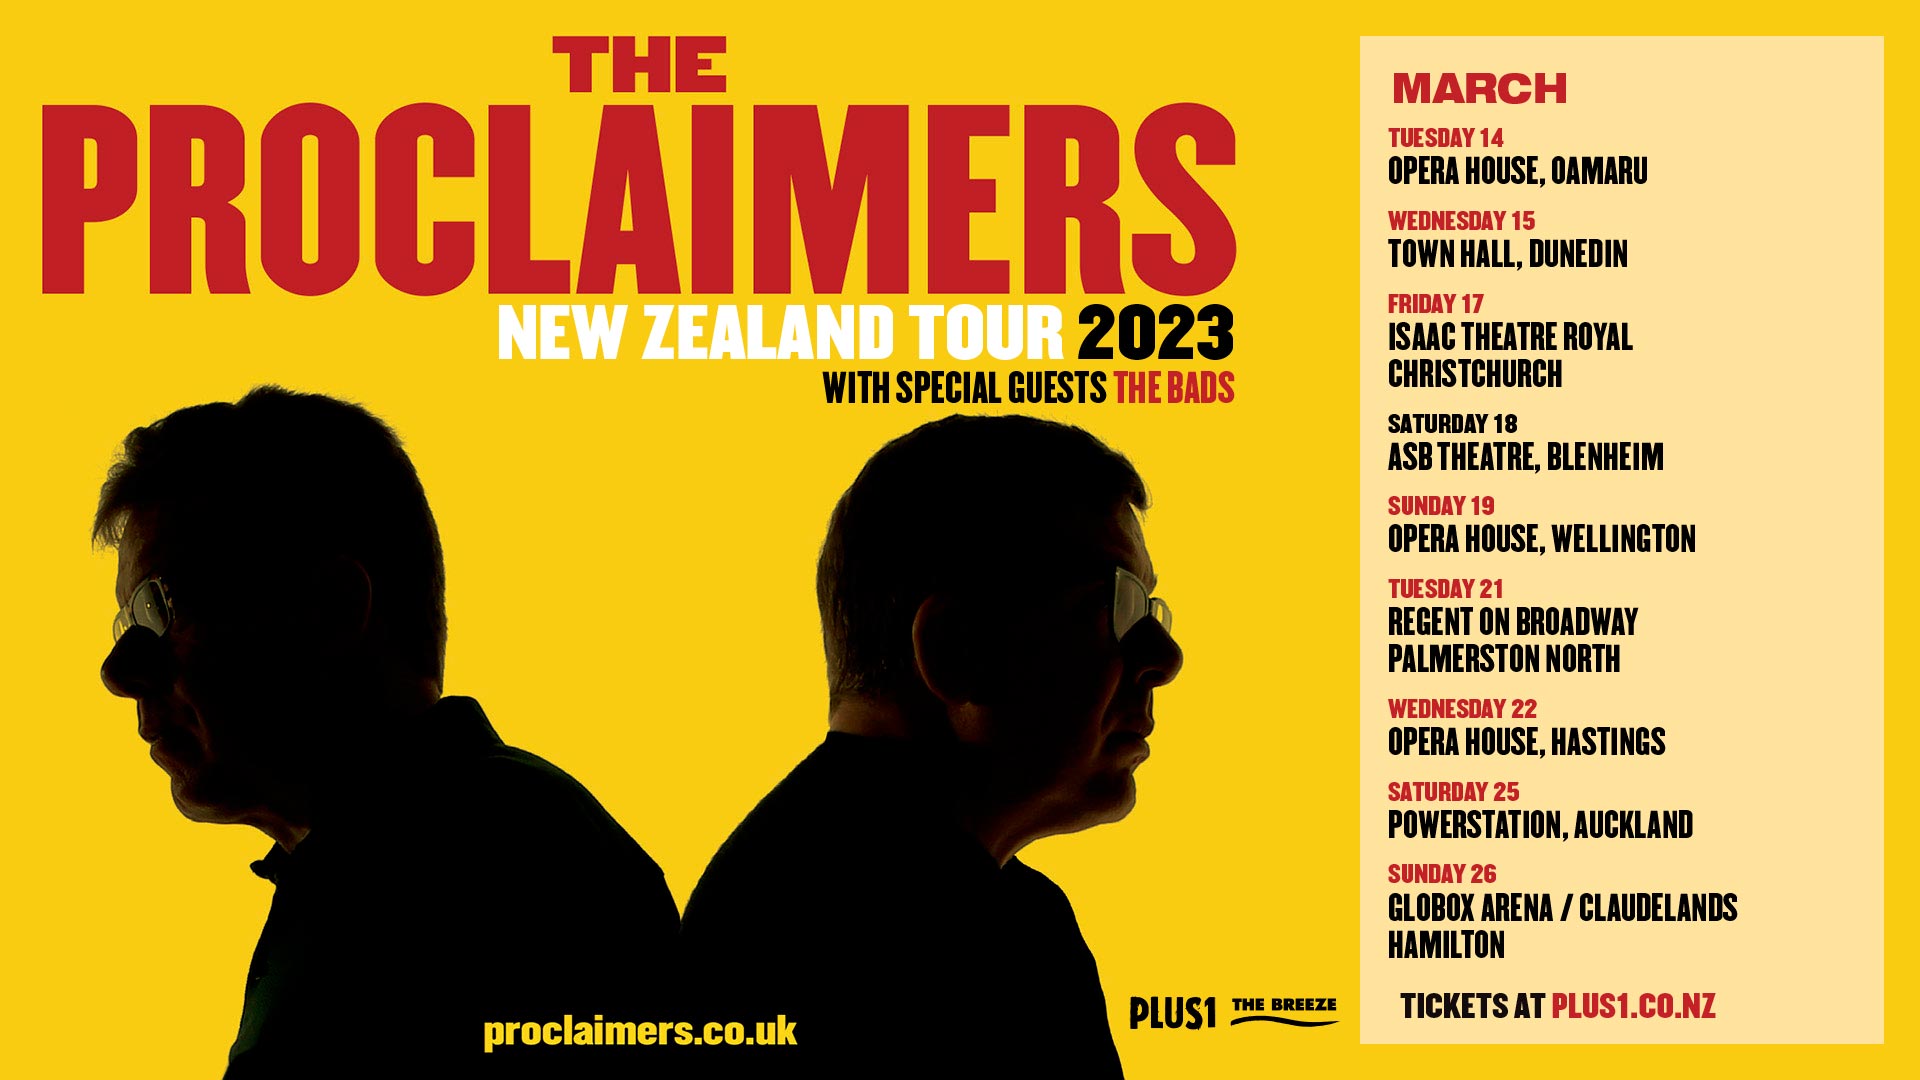 the proclaimers tour nz